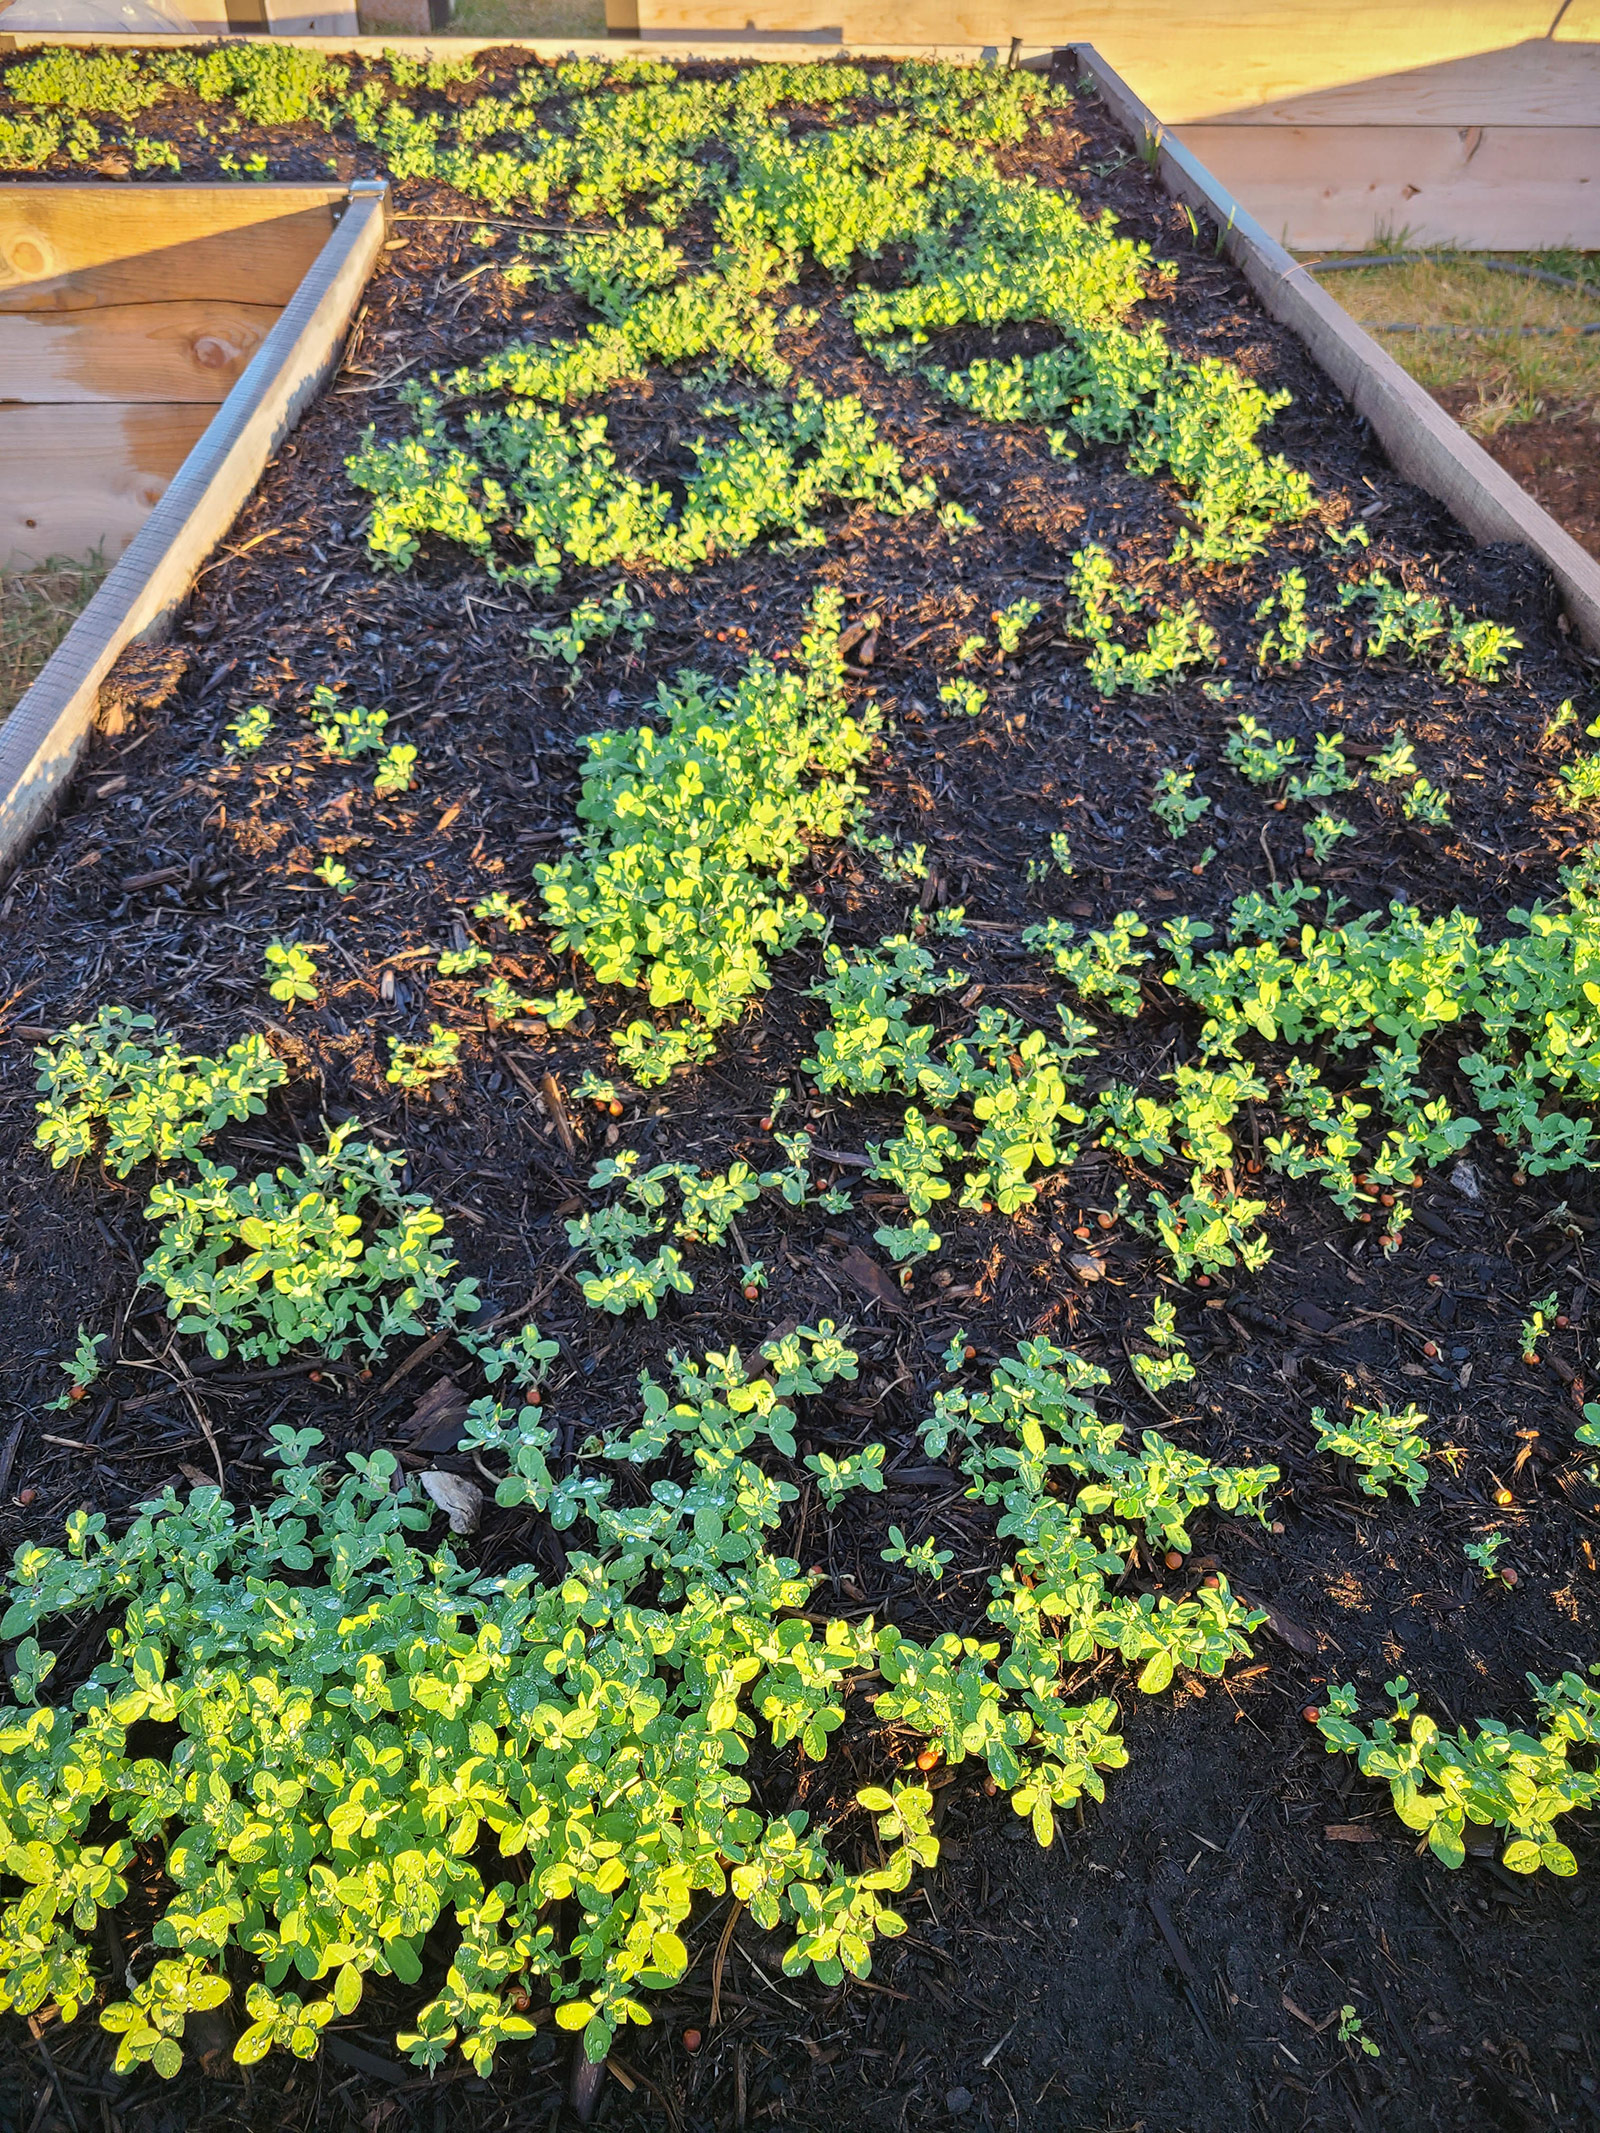 Austrian winter pea sprouts growing in a raised garden bed